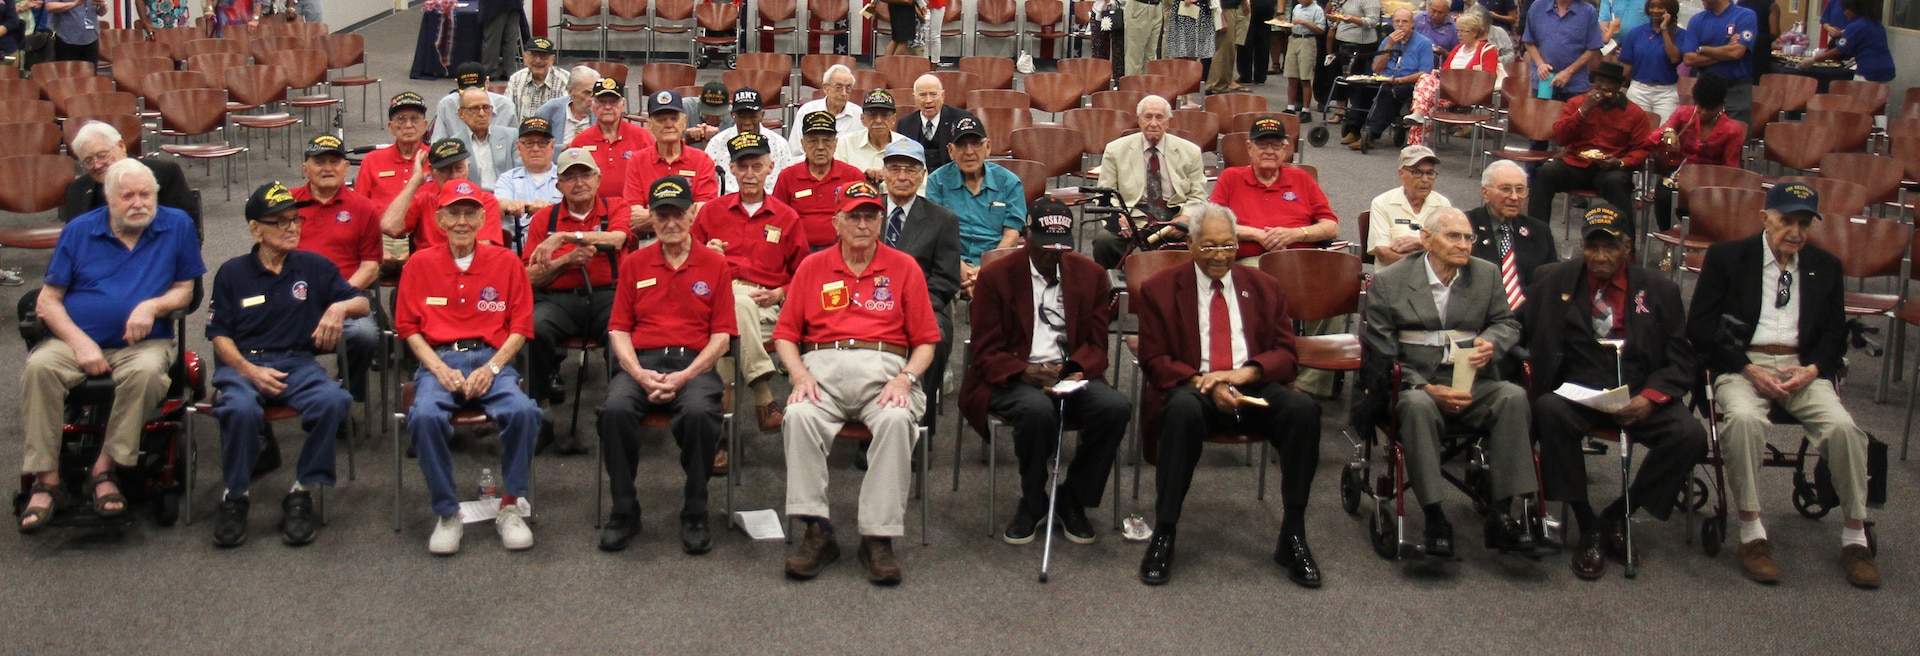 World War II veterans gather for a group photo after a ceremony honoring their service and sacrifice at the Military and Family Readiness Center at Joint Base San Antonio-Fort Sam Houston Aug. 20. The ceremony was hosted by the FSH Survivor Outreach Services Support Program in partnership with the FSH Gold Star Families as a way to honor the WWII veterans who were unable to travel to France for the 75th Anniversary of D-Day.